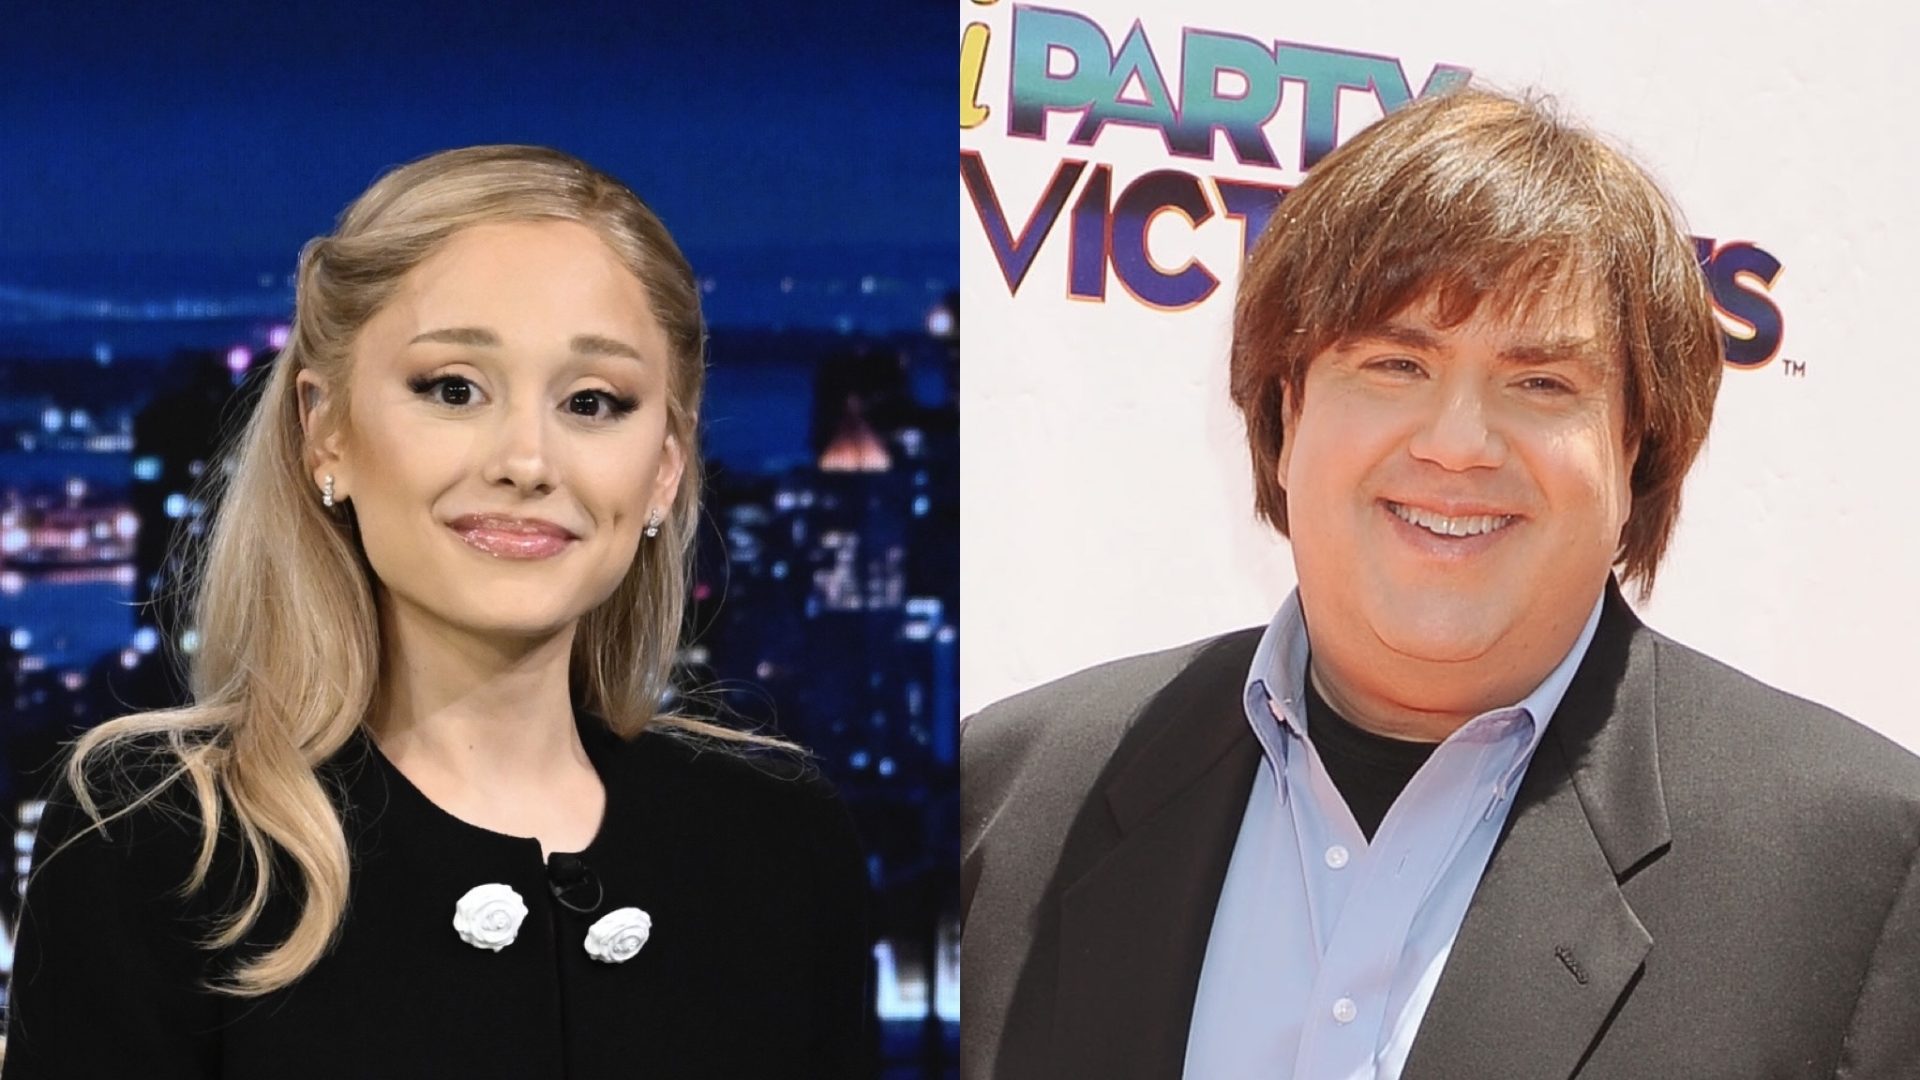 Ariana Grande Speaks On Her Experience At Nickelodeon Amid The Recent Allegations Against Dan Schneider (WATCH)